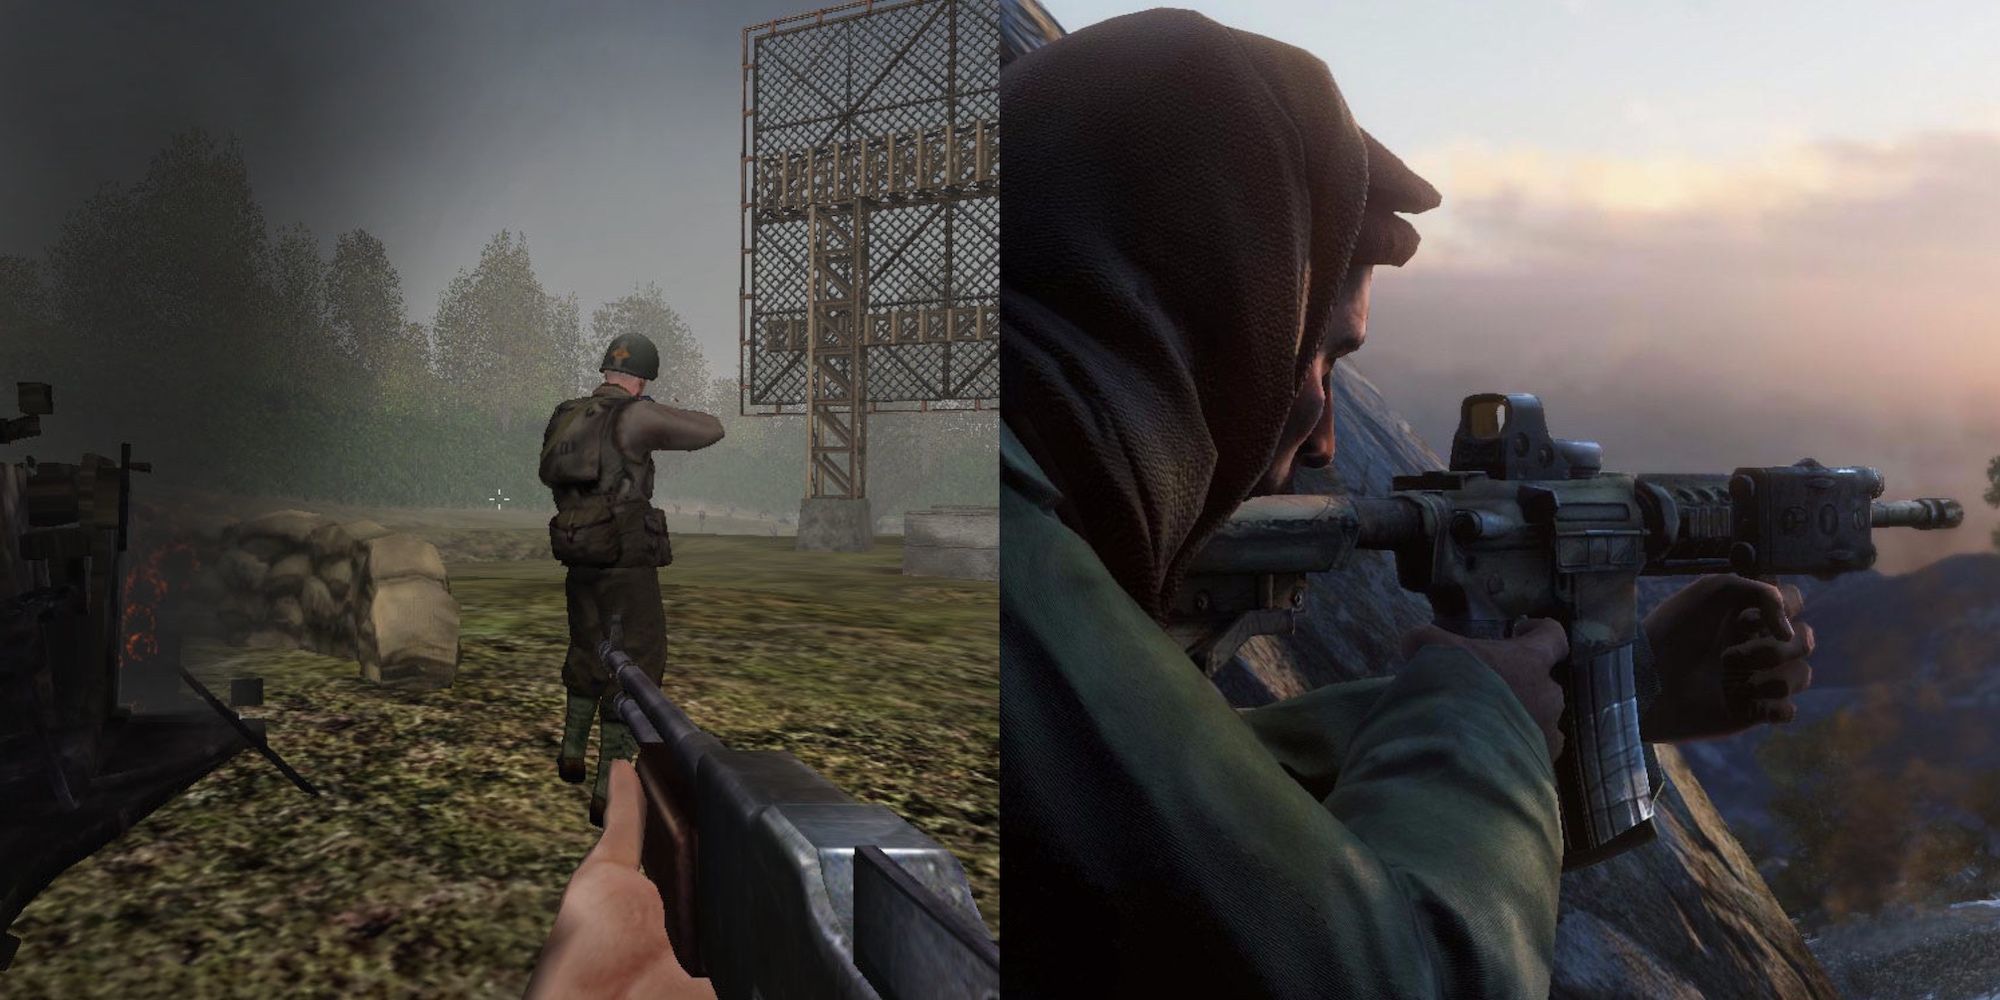 Allied Assault on Left, 2010 reboot on the right